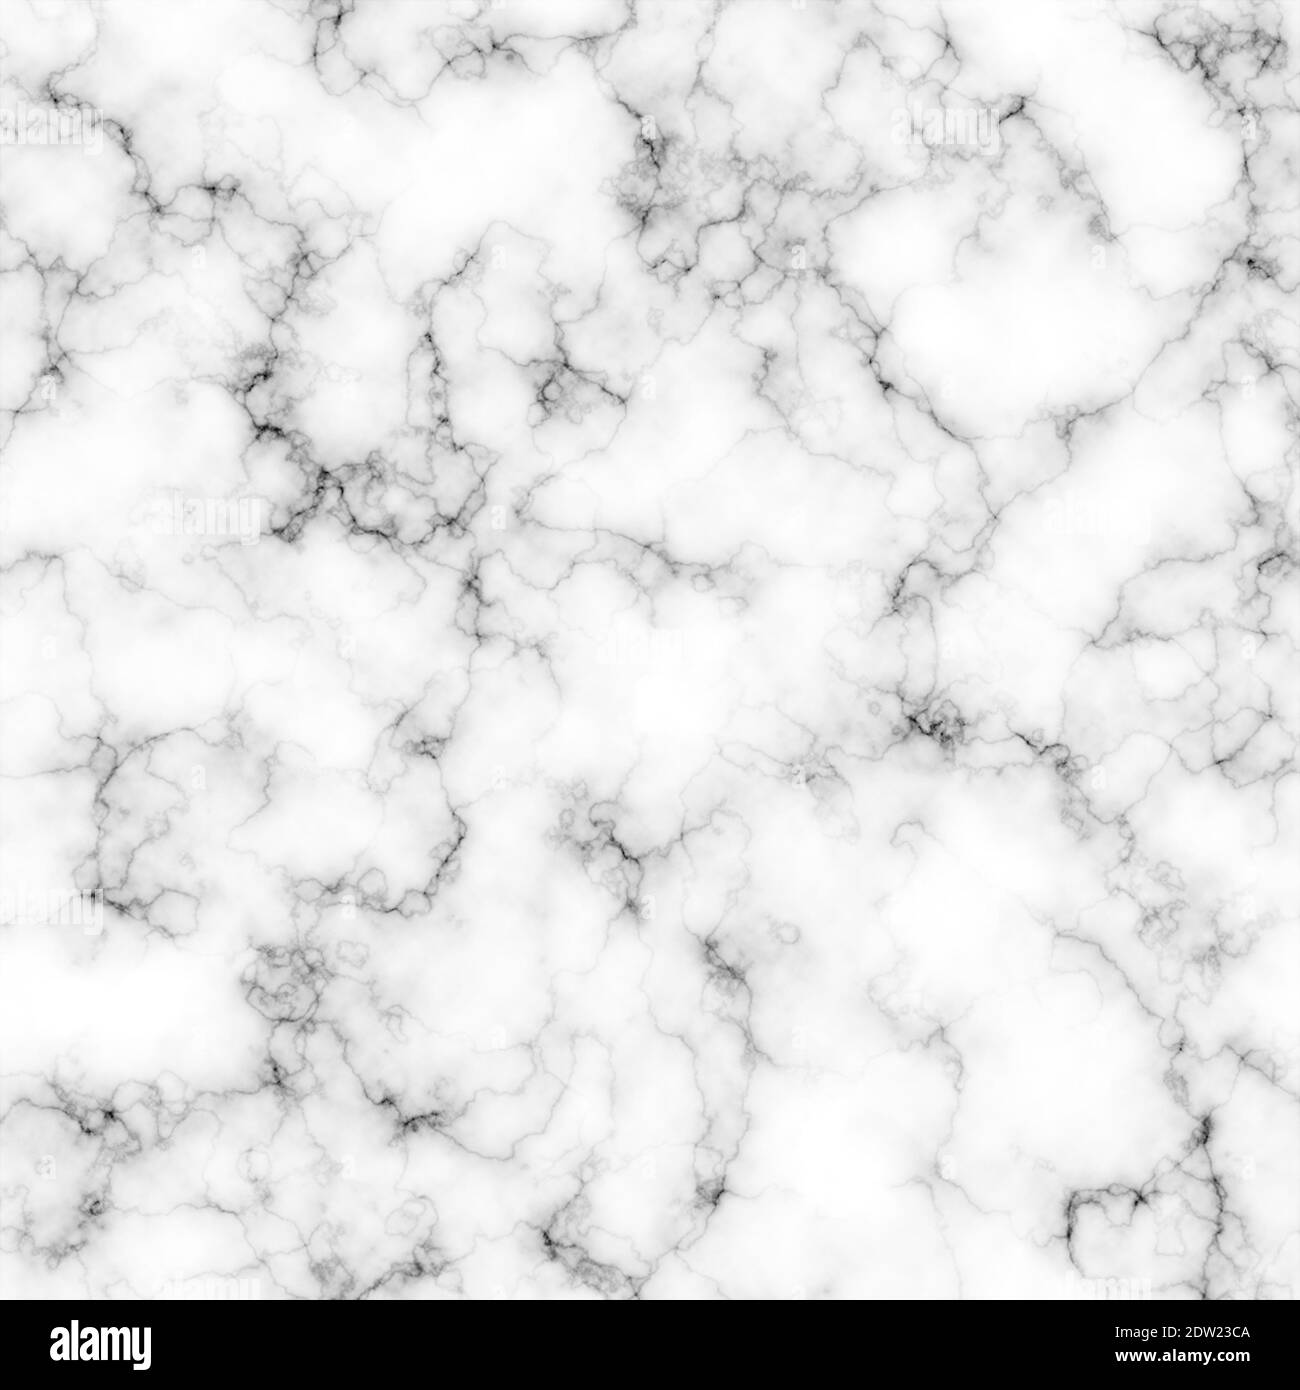 Marble patterned texture. Stock Photo